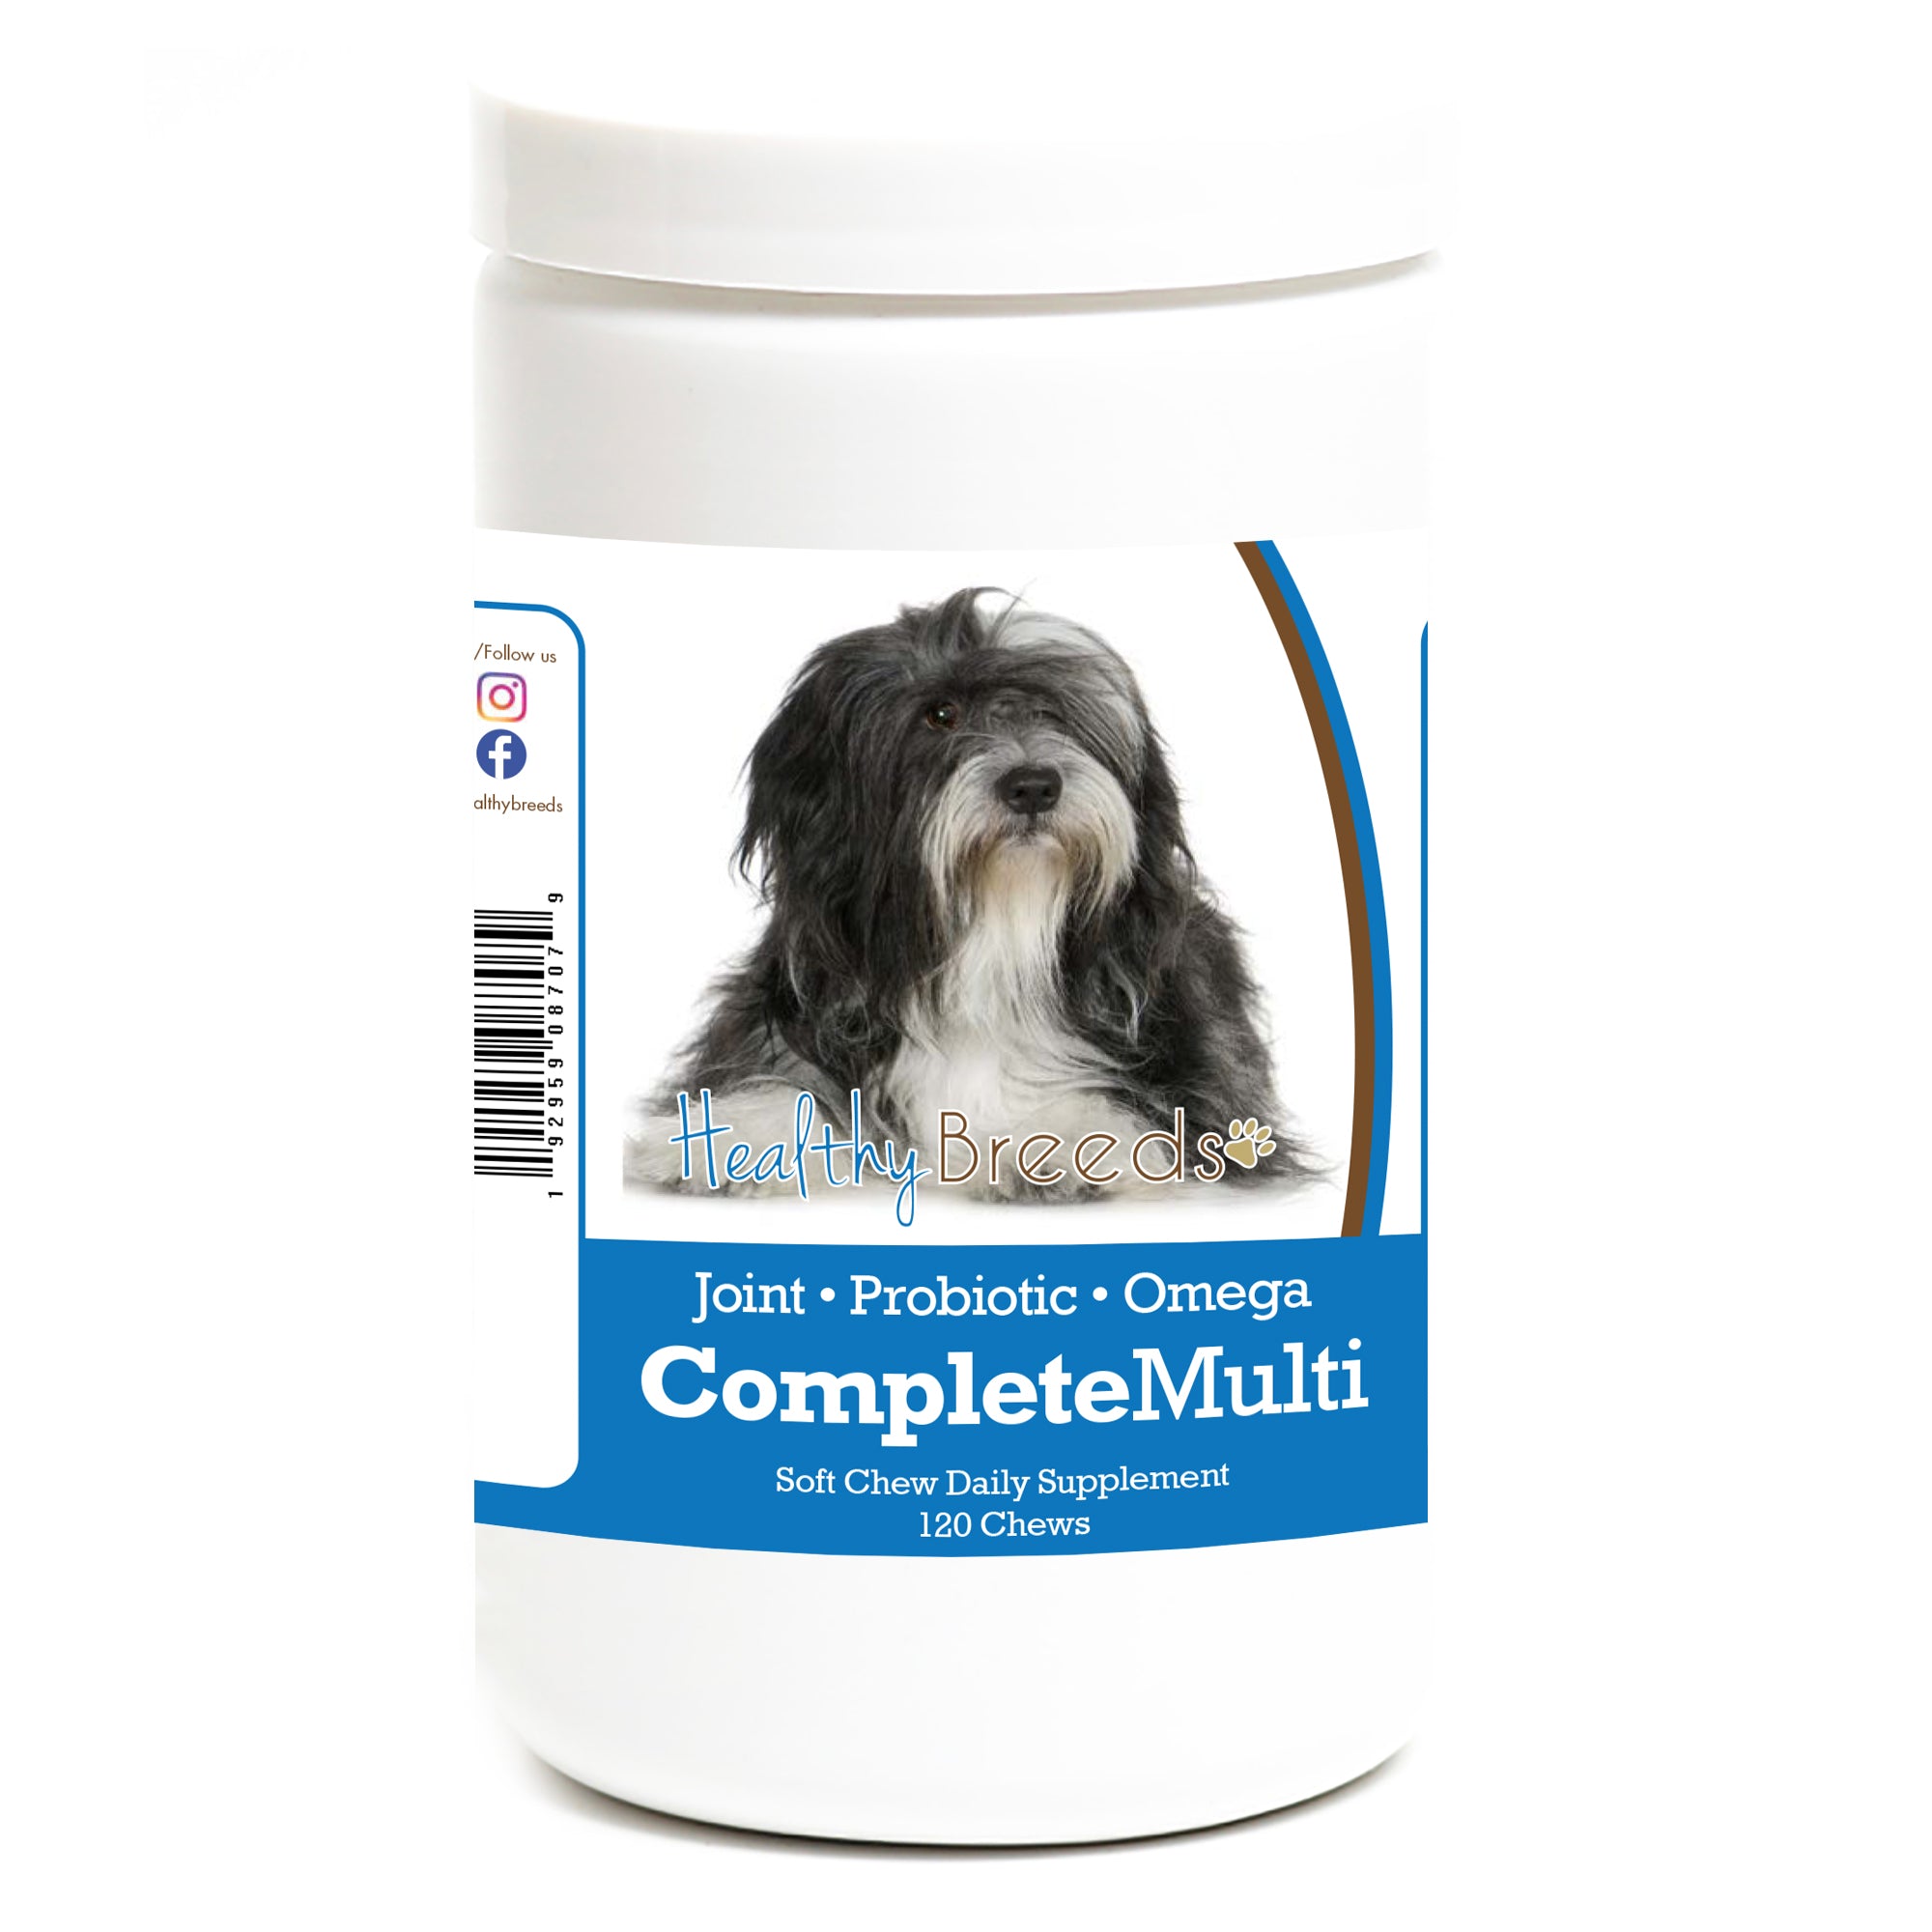 Lhasa Apso All In One Multivitamin Soft Chew 120 Count